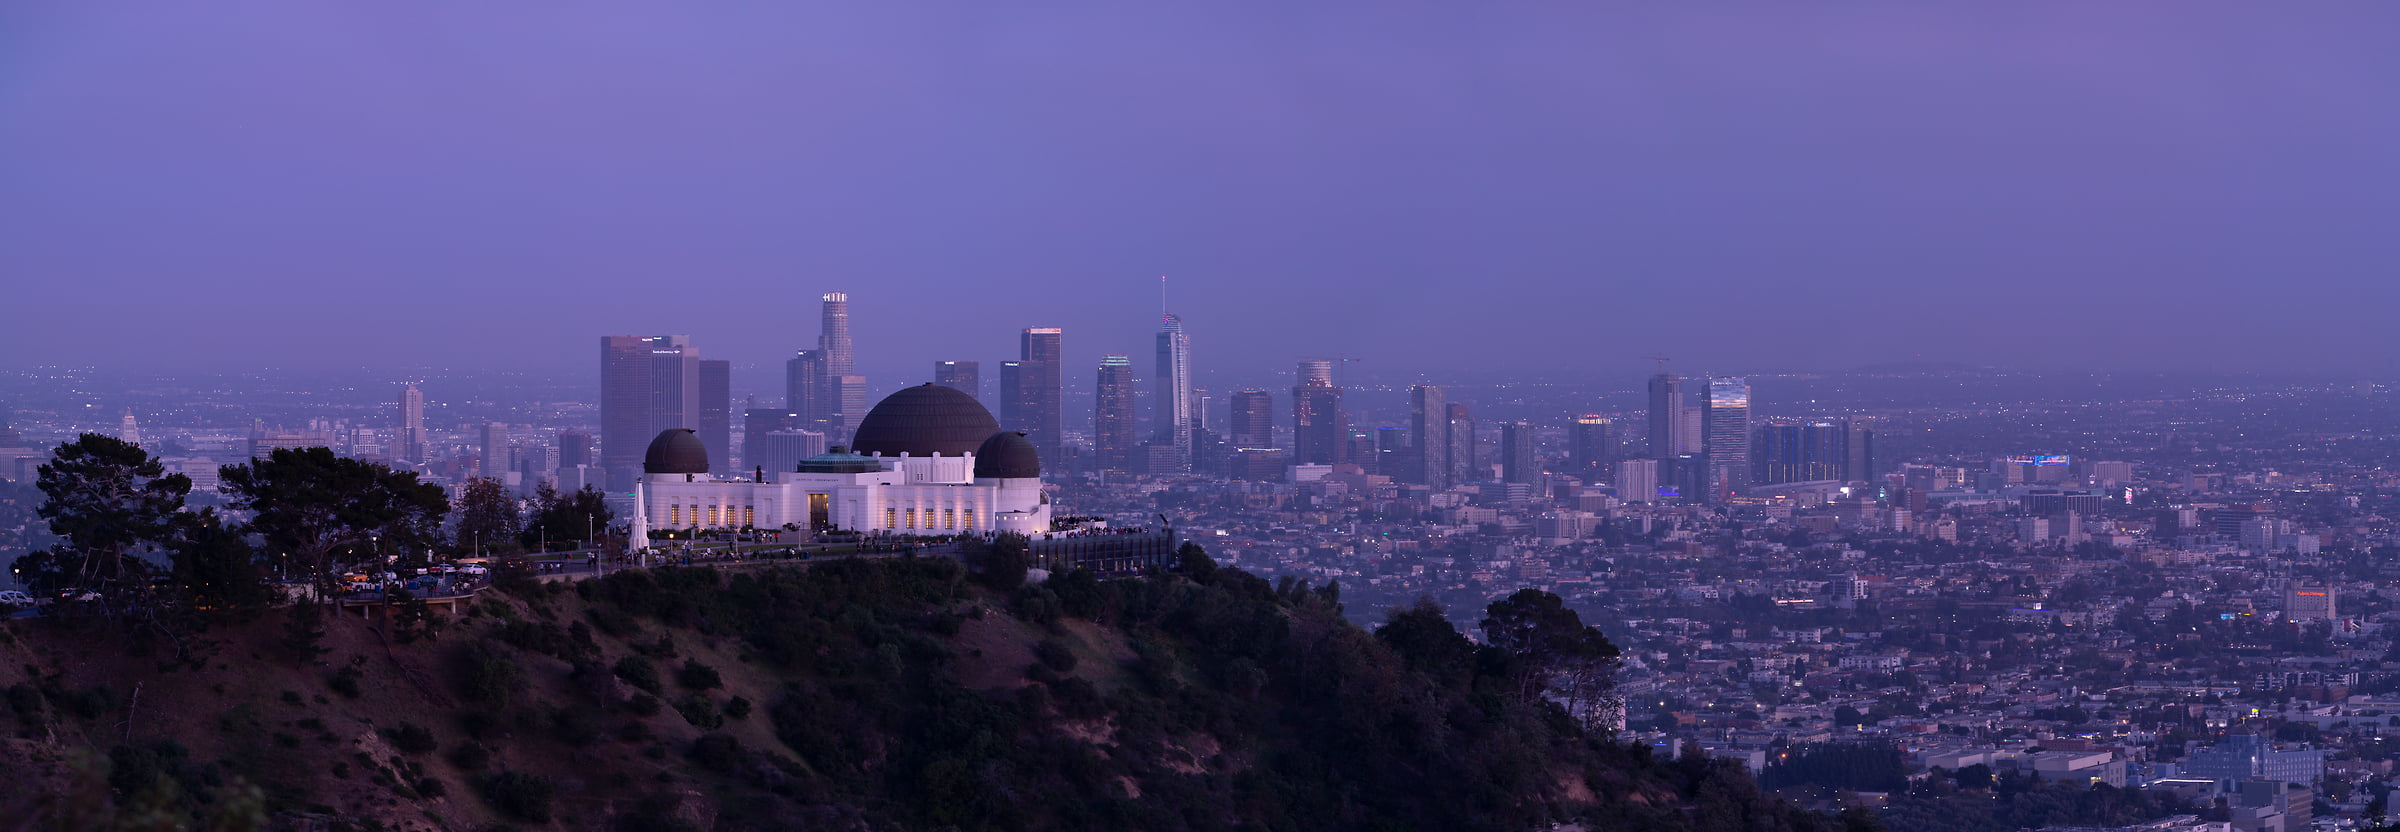 333 megapixels! A very high resolution, large-format VAST photo print of Griffith Park at night; landscape photograph created by Greg Probst in Griffith Park, Los Angeles.